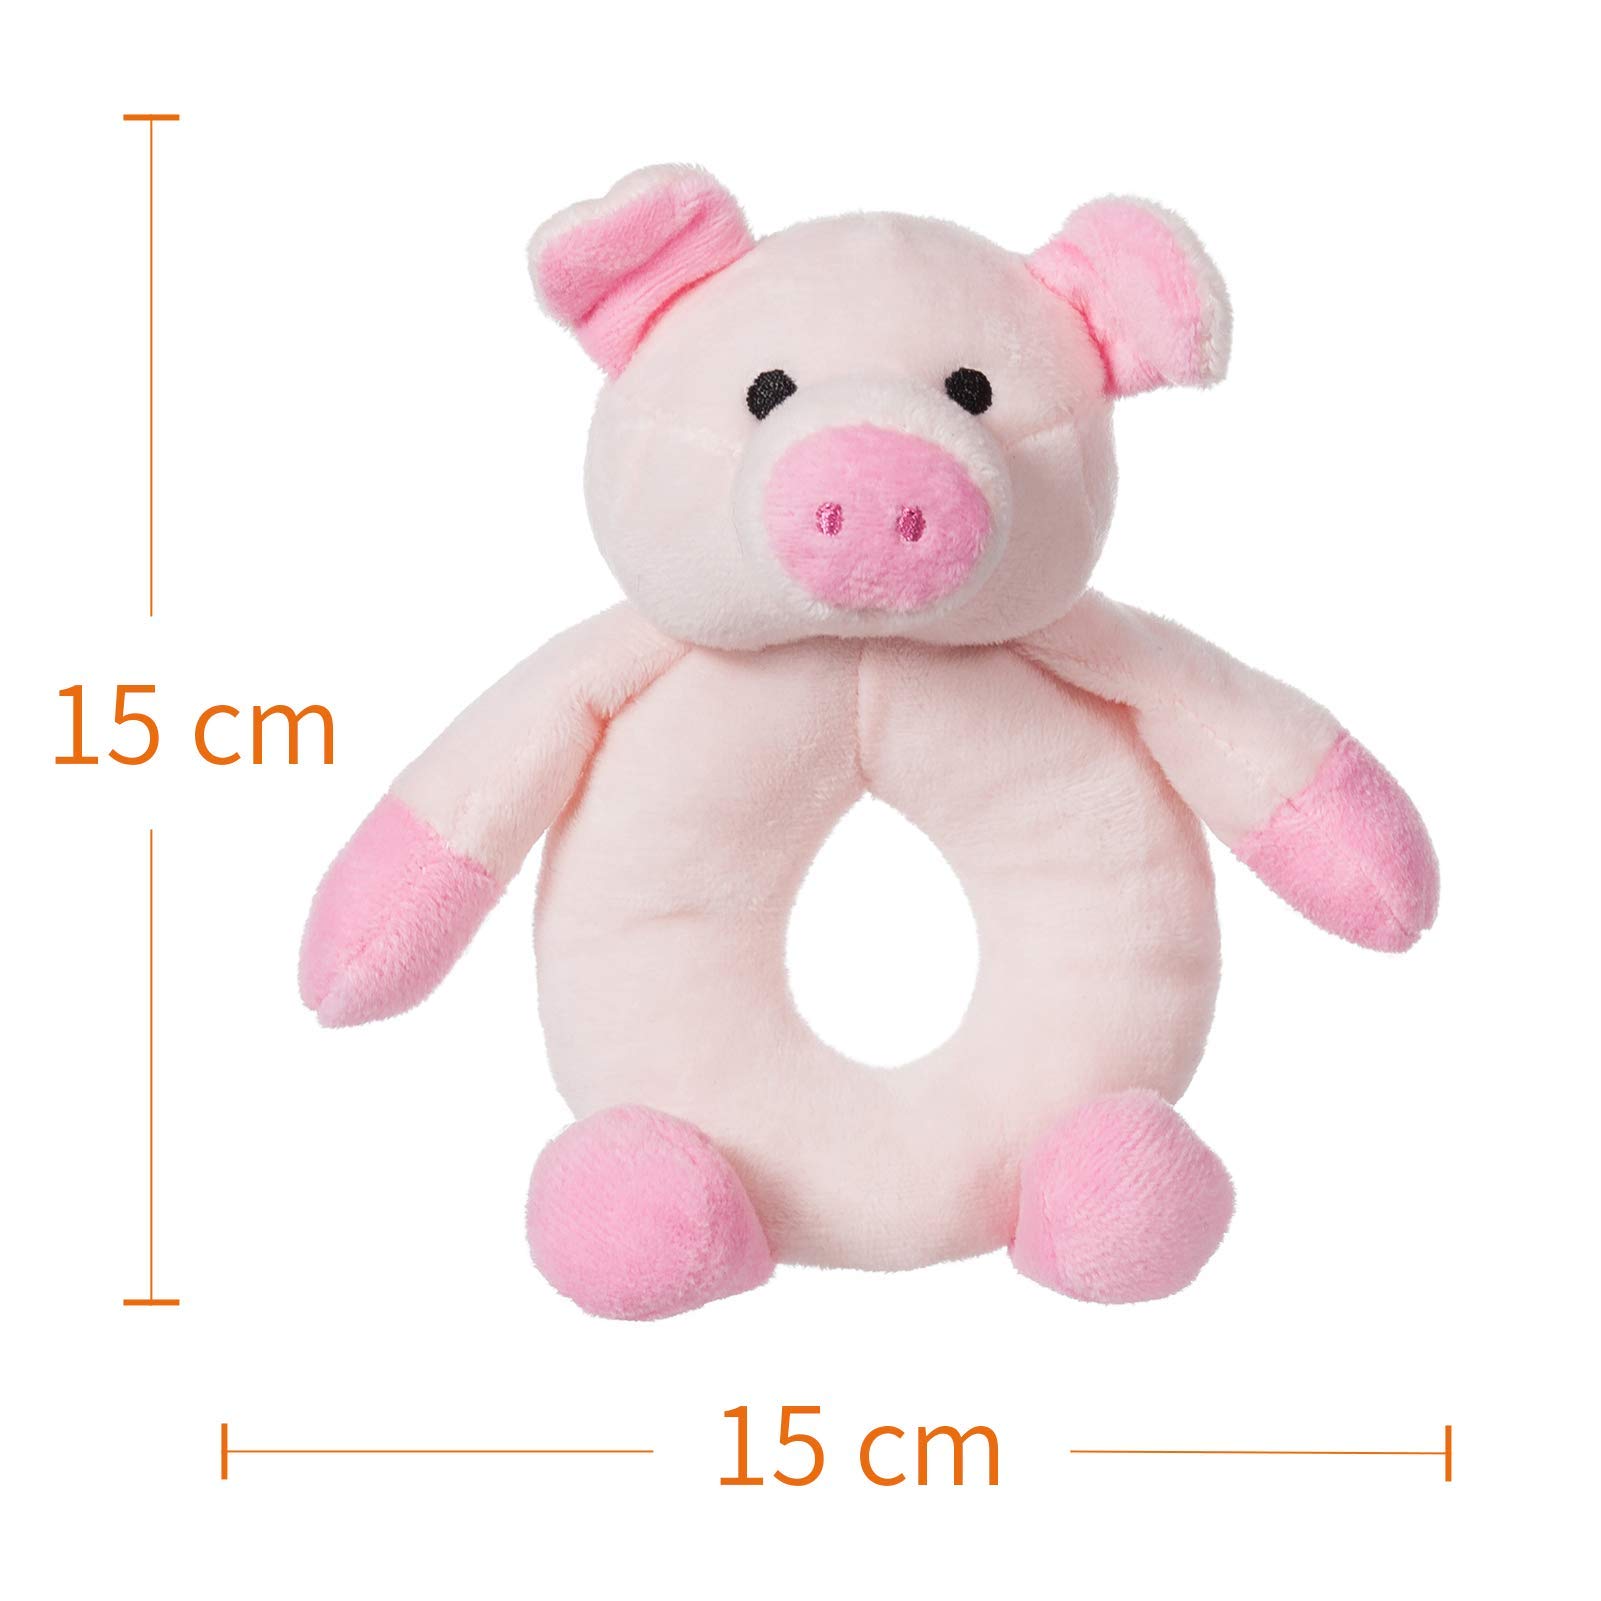 Apricot Lamb Baby Lovey Pig Soft Rattle Toy, Plush Stuffed Animal for Newborn Soft Hand Grip Shaker Over 0 Months (Pink Pig, 6 Inches)